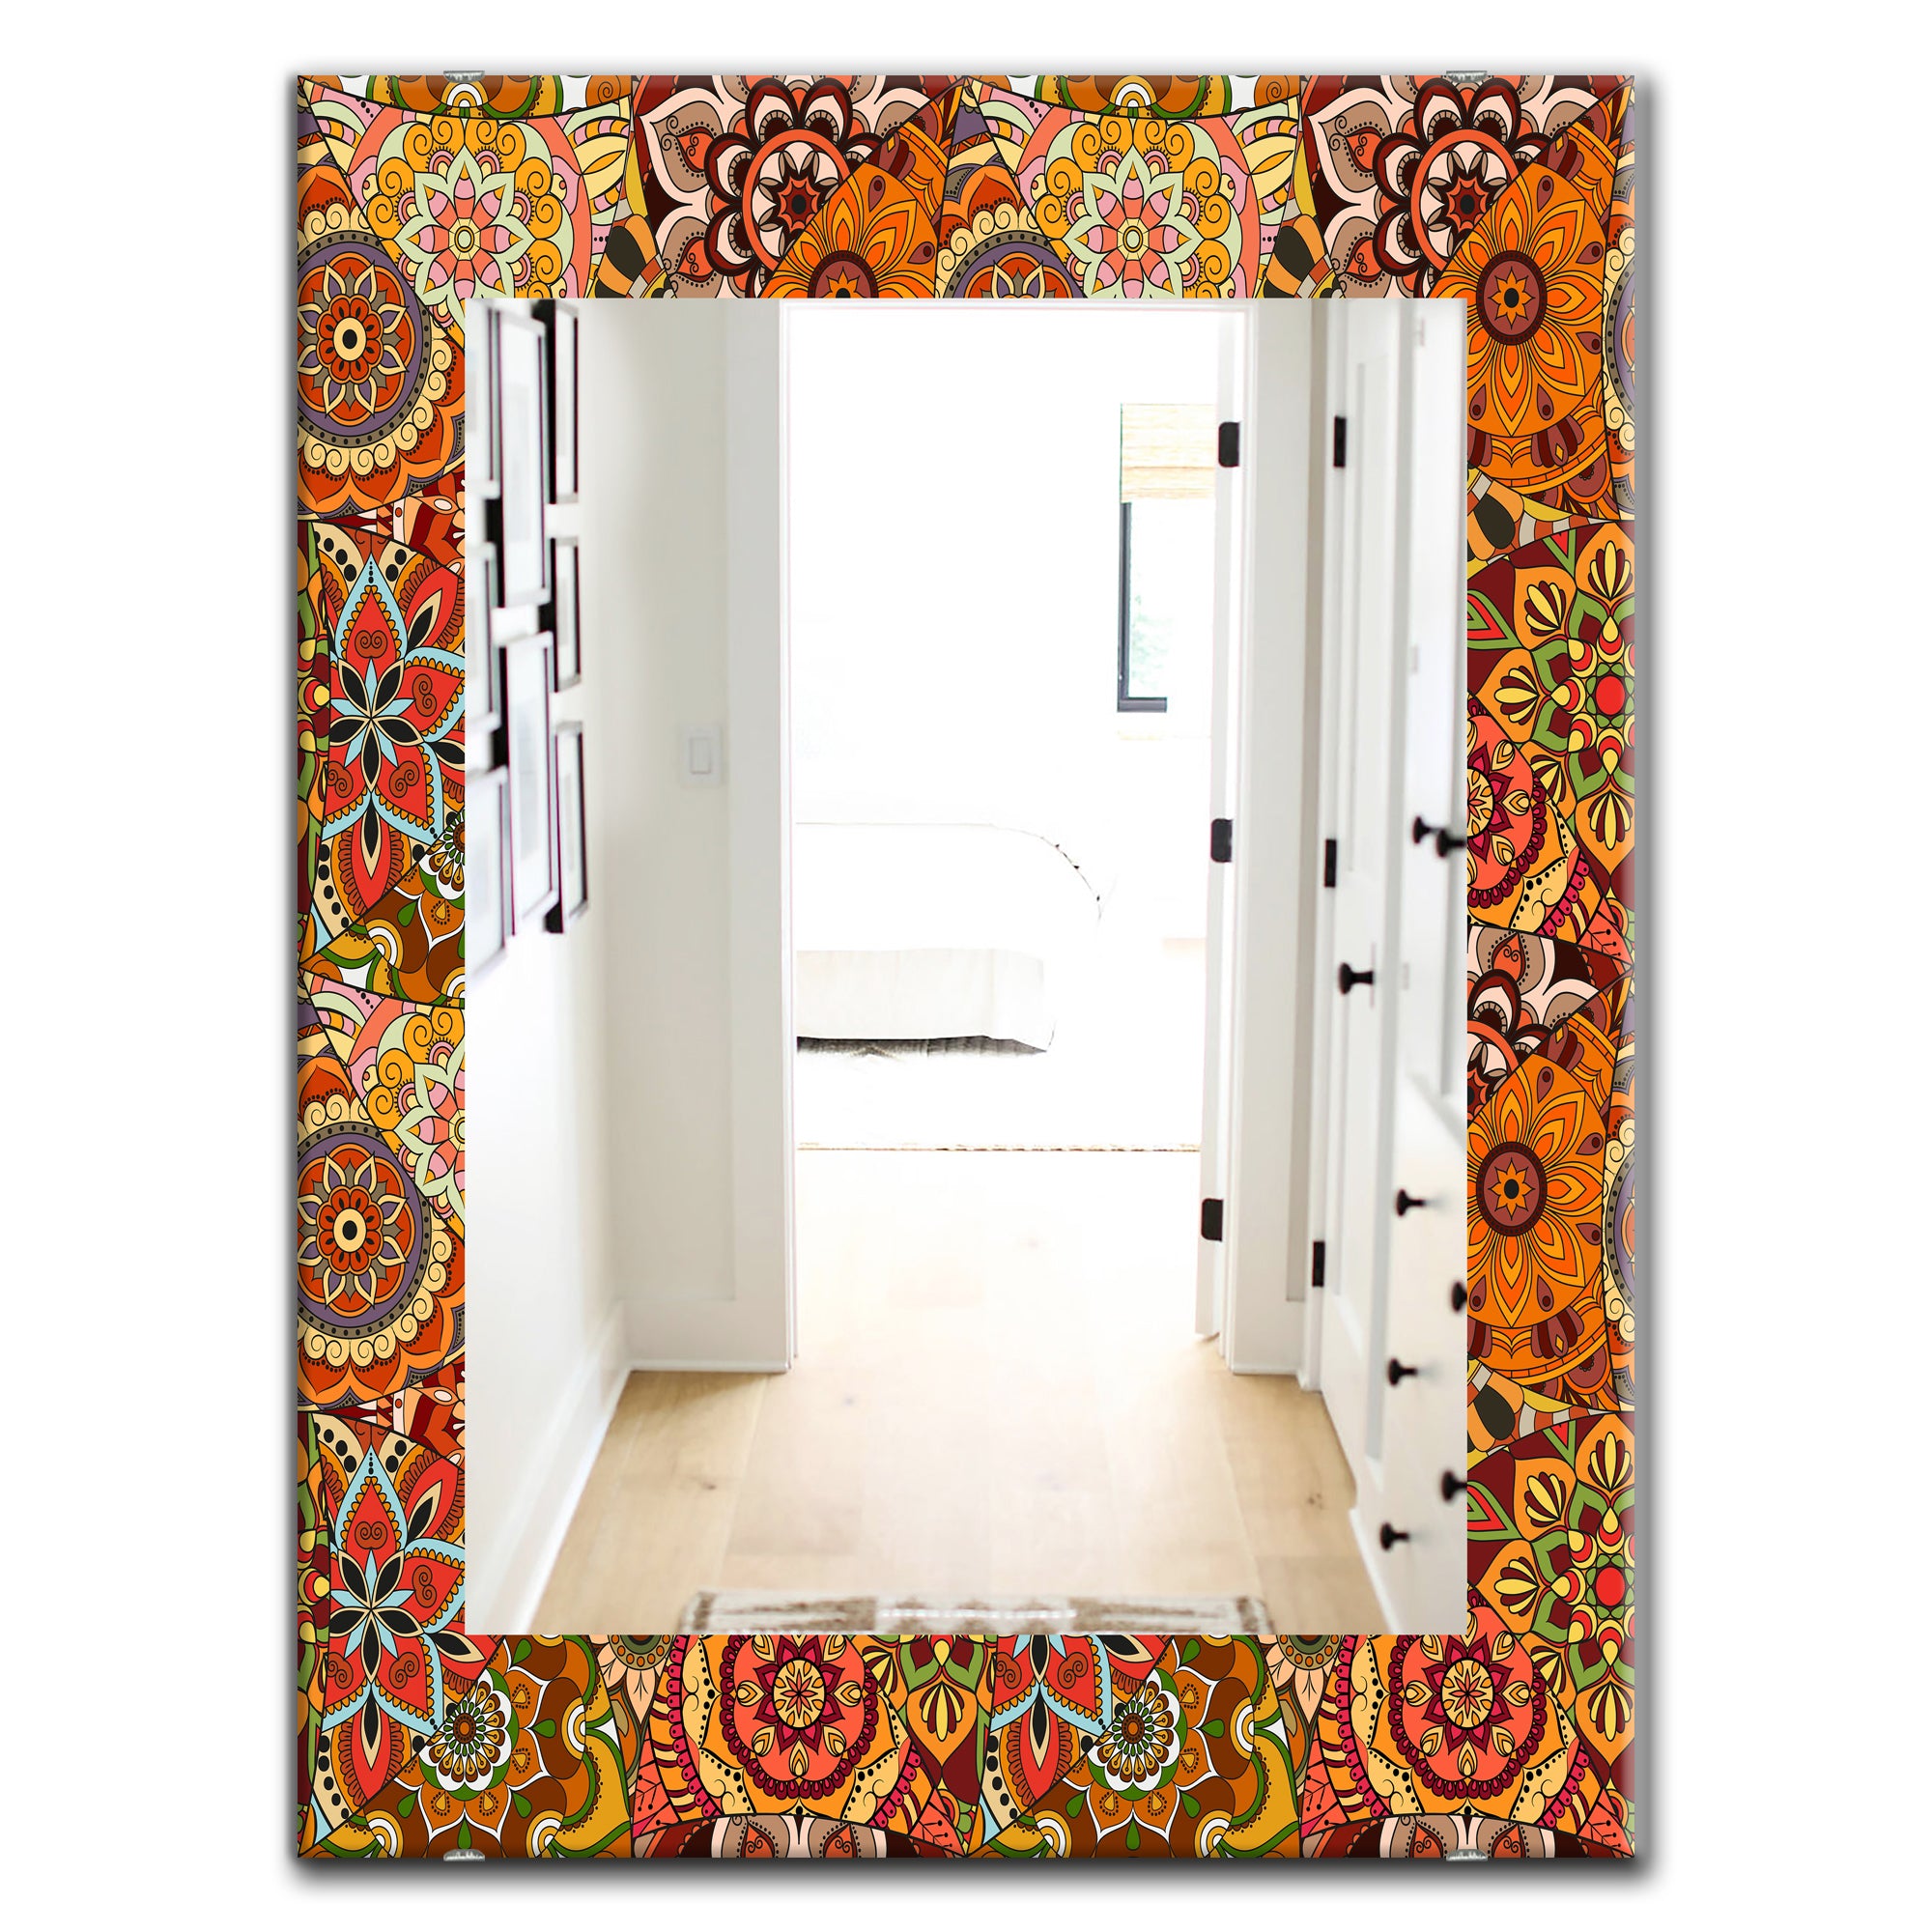 Designart 'Pattern Tile With Mandalas' Bohemian and Eclectic Mirror - Oval or Round Wall Mirror